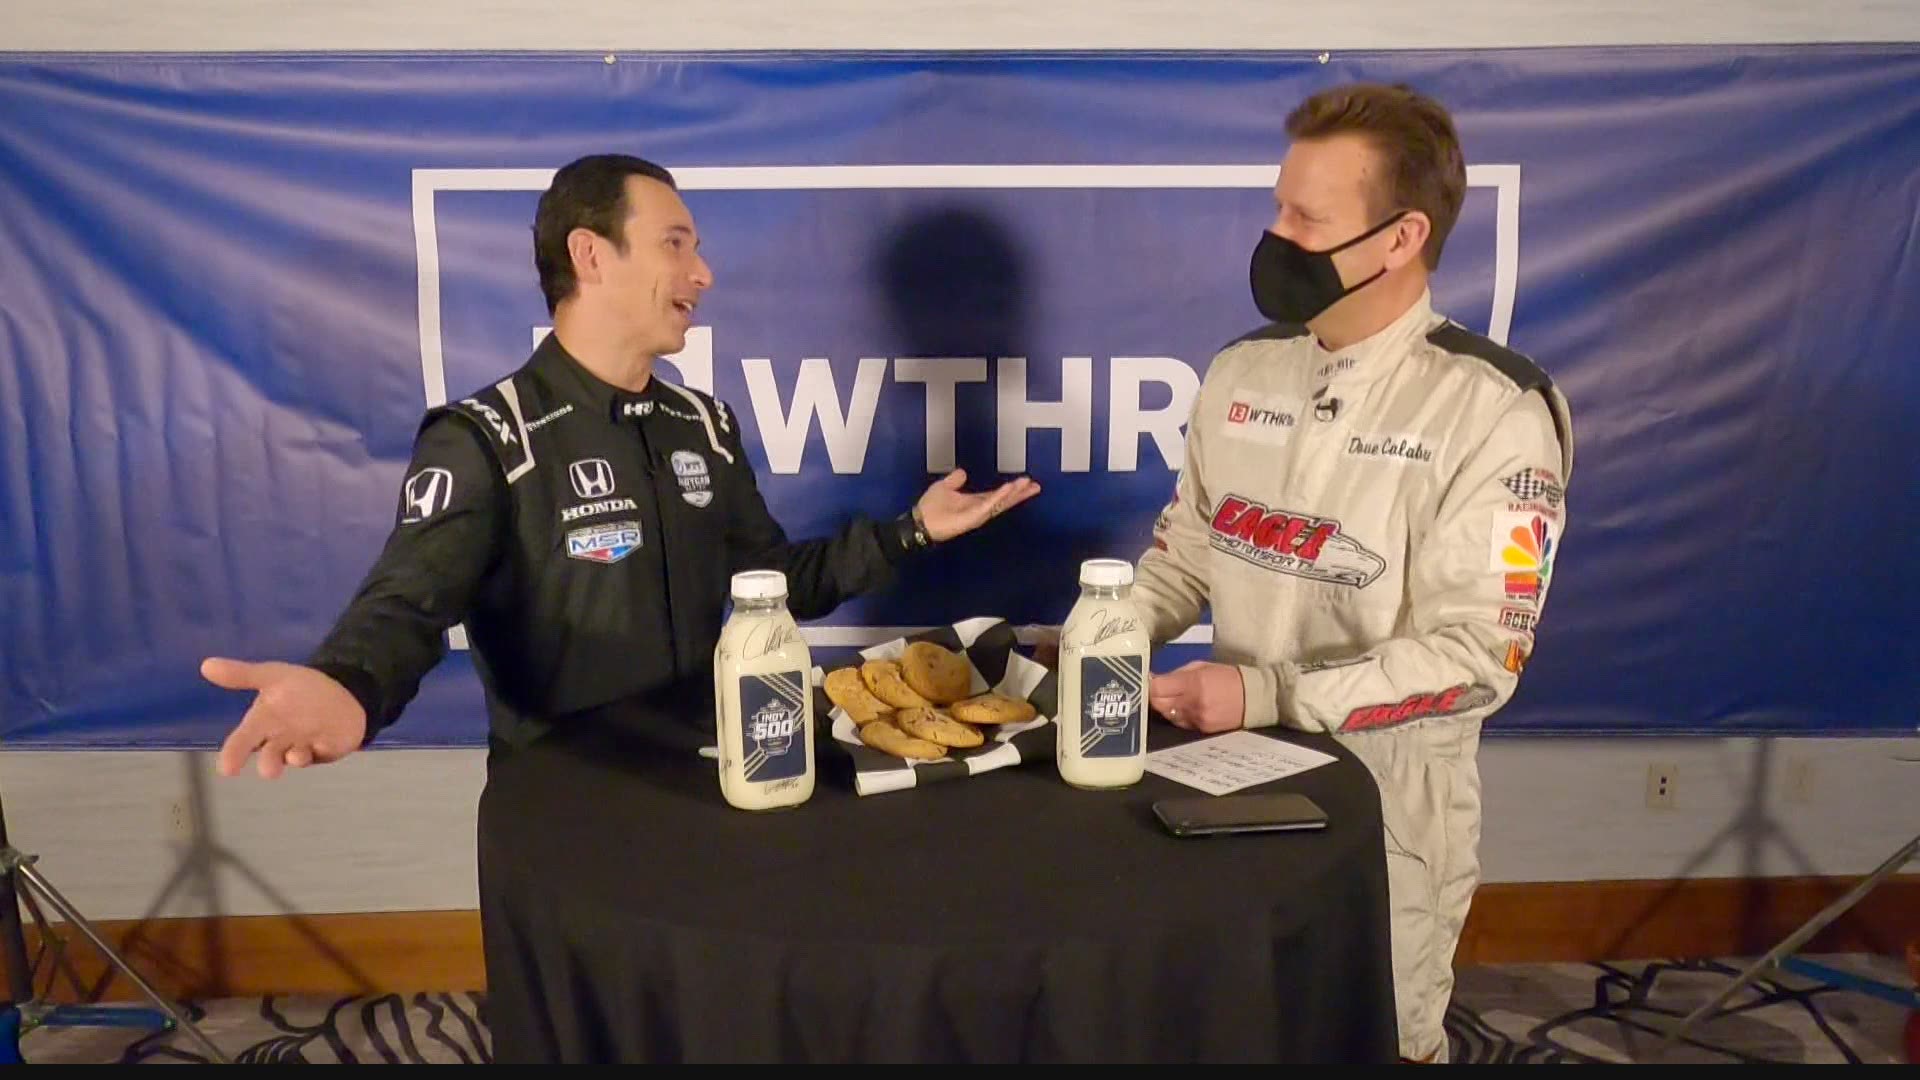 Dave Calabro asks drivers 'hard hitting' questions over milk & cookies.